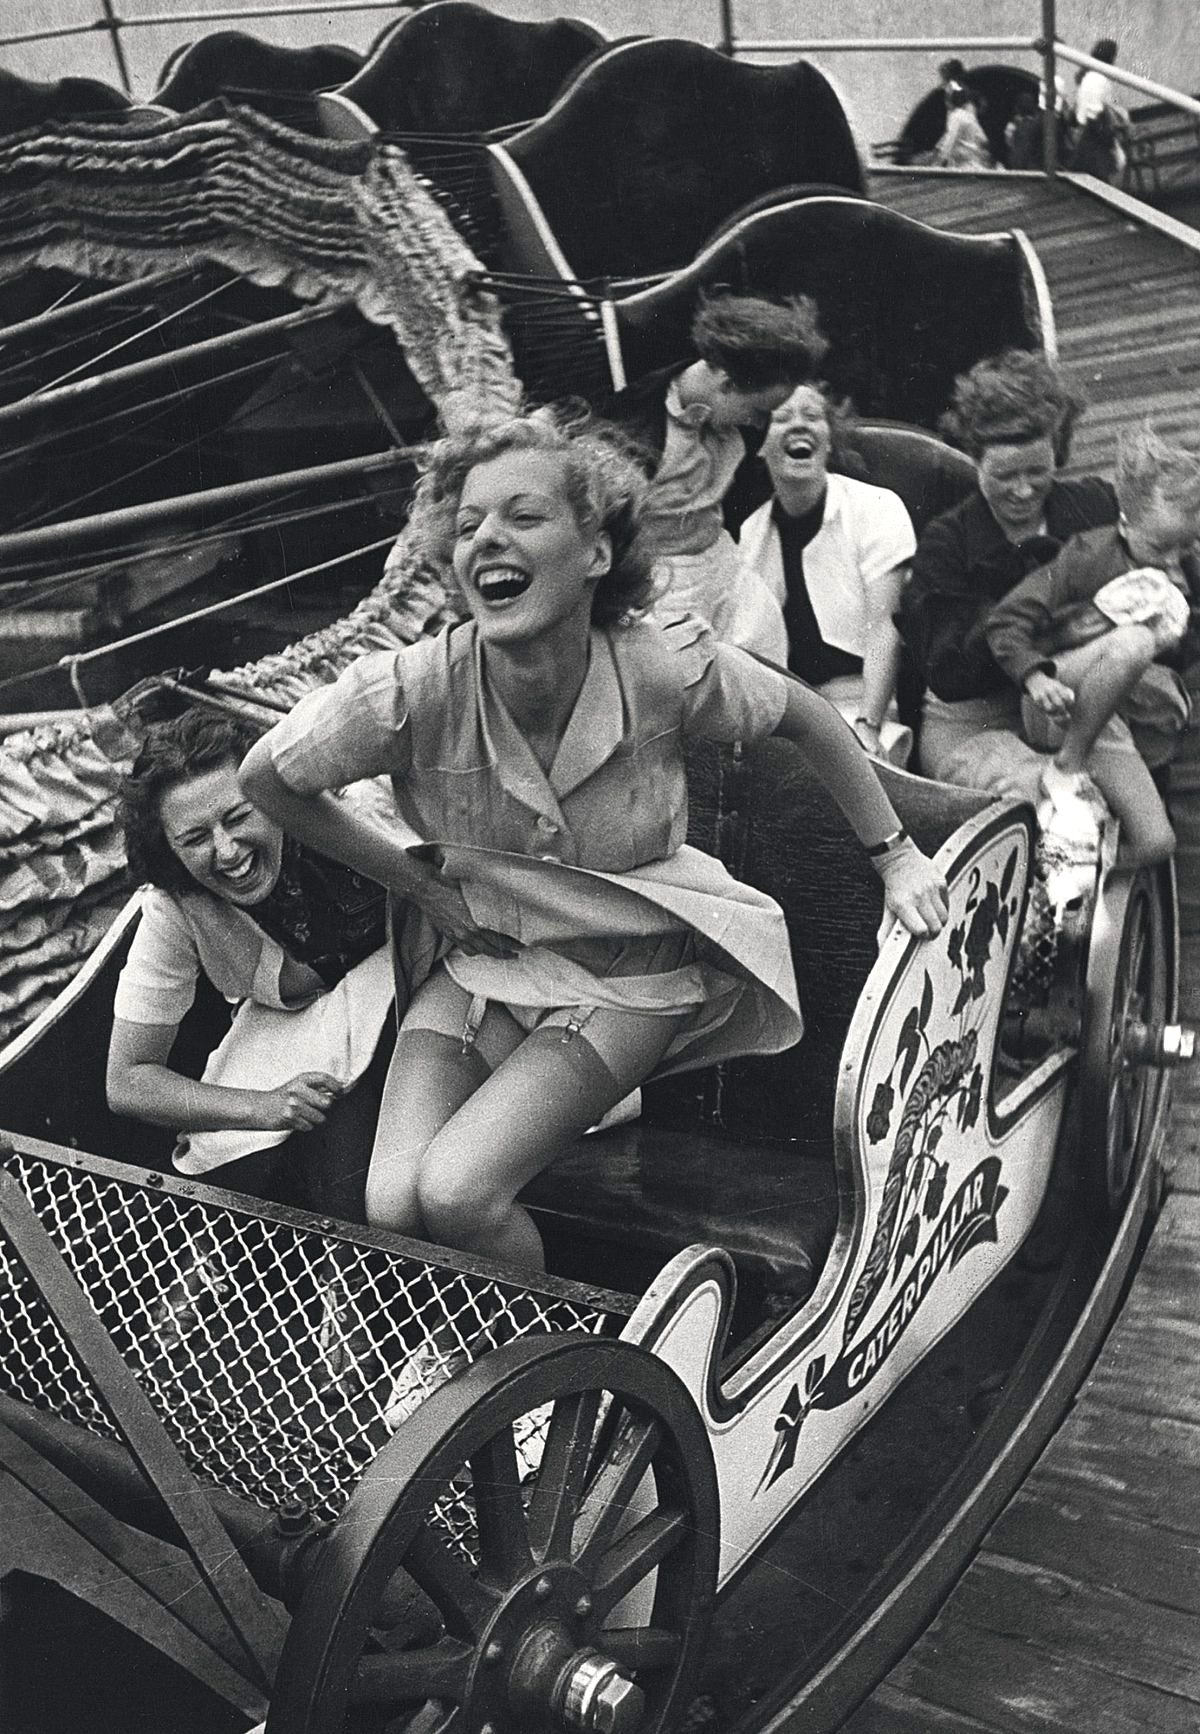 From Pub to Seaside: Grace Robertson's Mother's Day Off Chronicles Women's Rare Day of Fun, 1950s